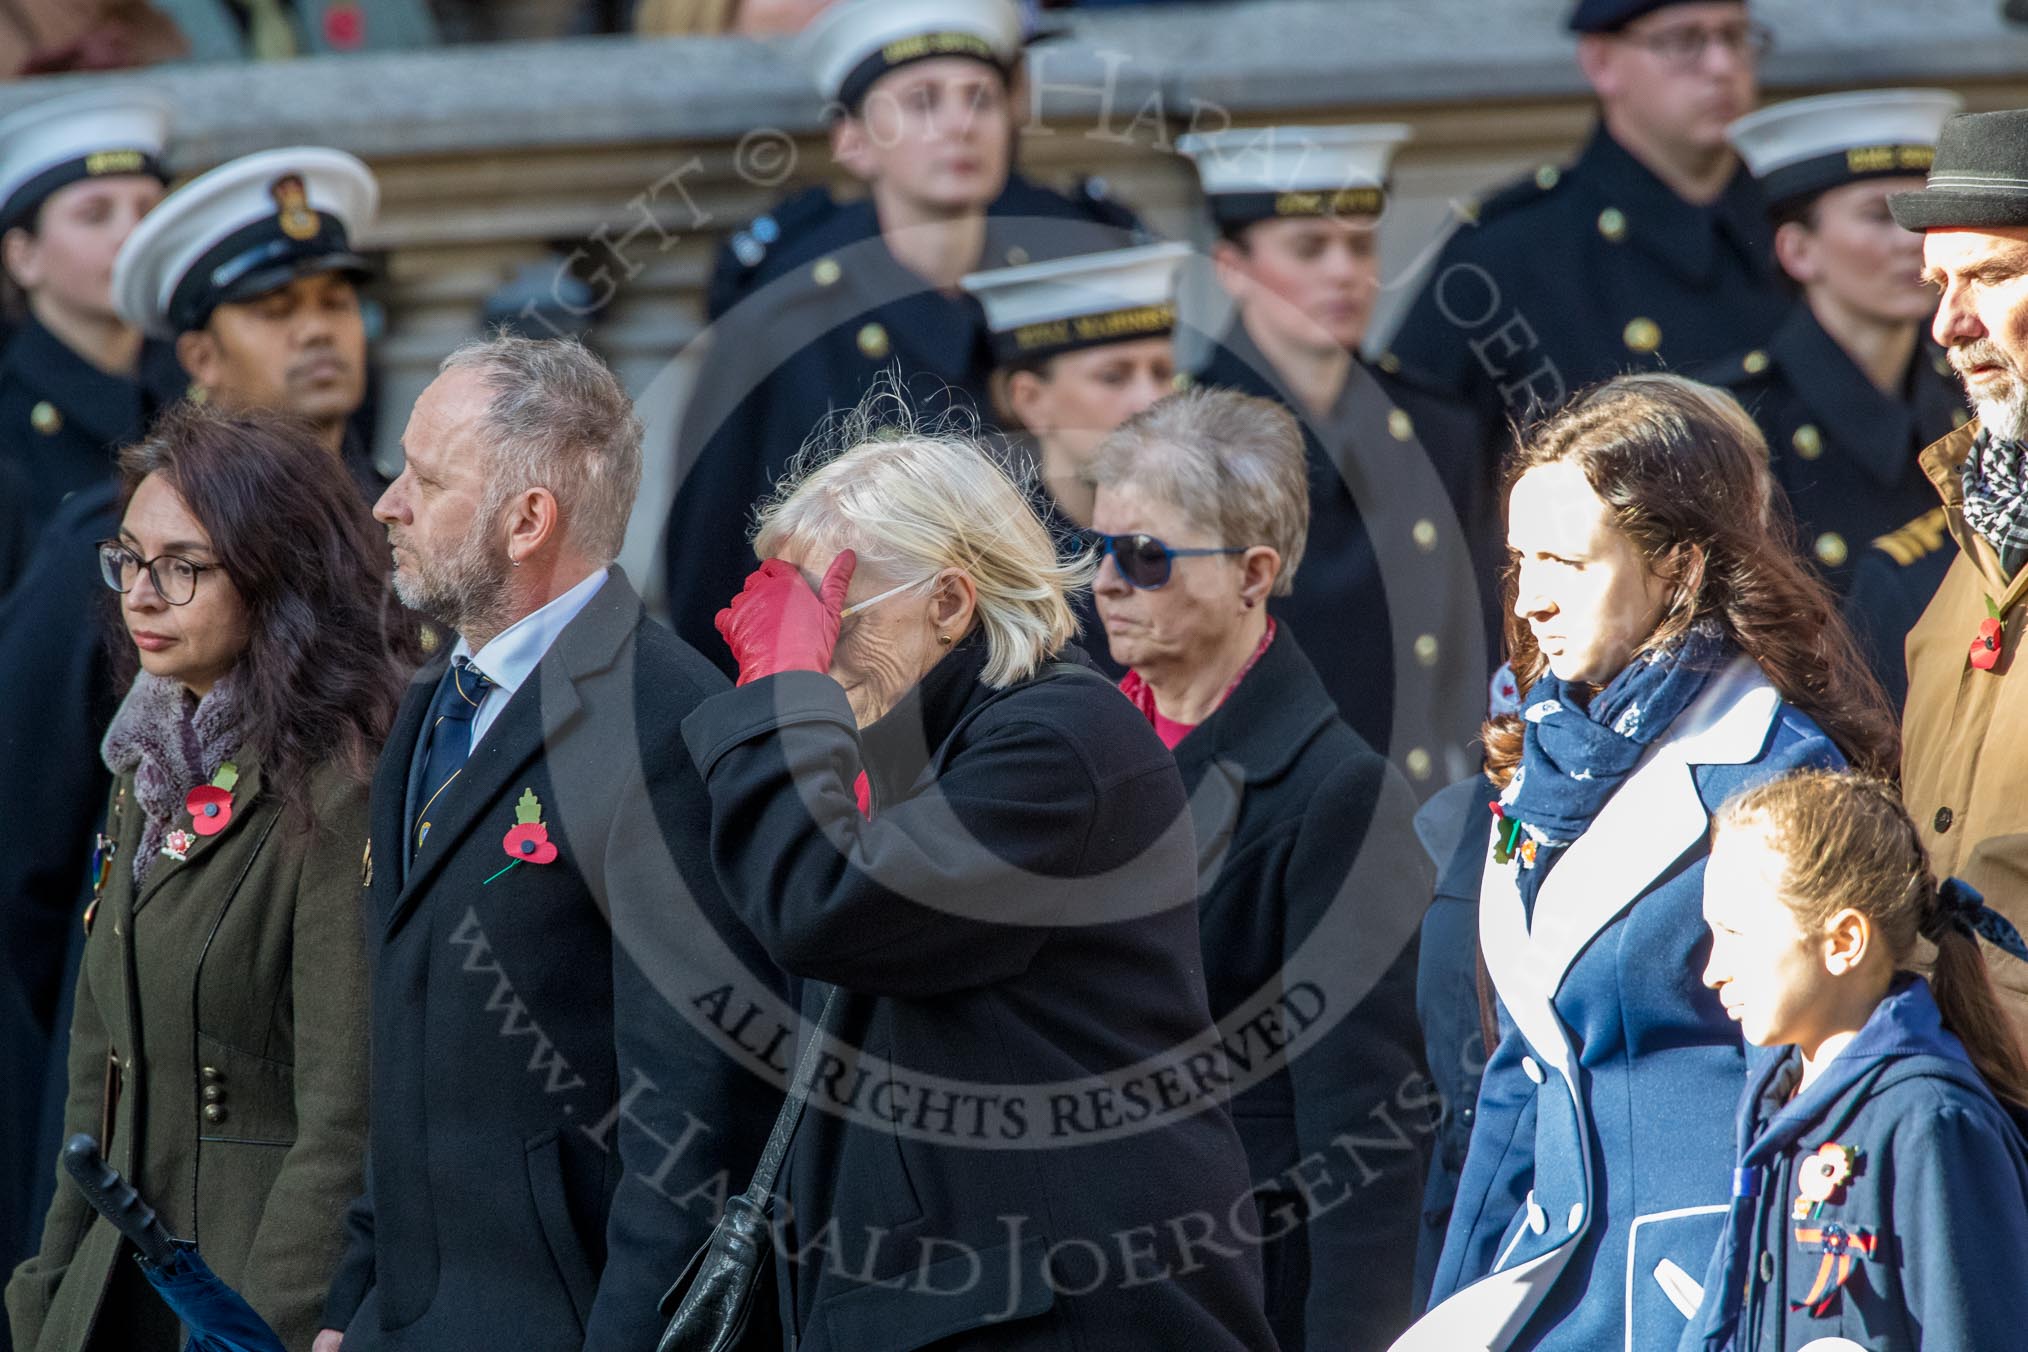 Shot at Dawn Pardons Campaign (Group M28, 24 members) during the Royal British Legion March Past on Remembrance Sunday at the Cenotaph, Whitehall, Westminster, London, 11 November 2018, 12:28.